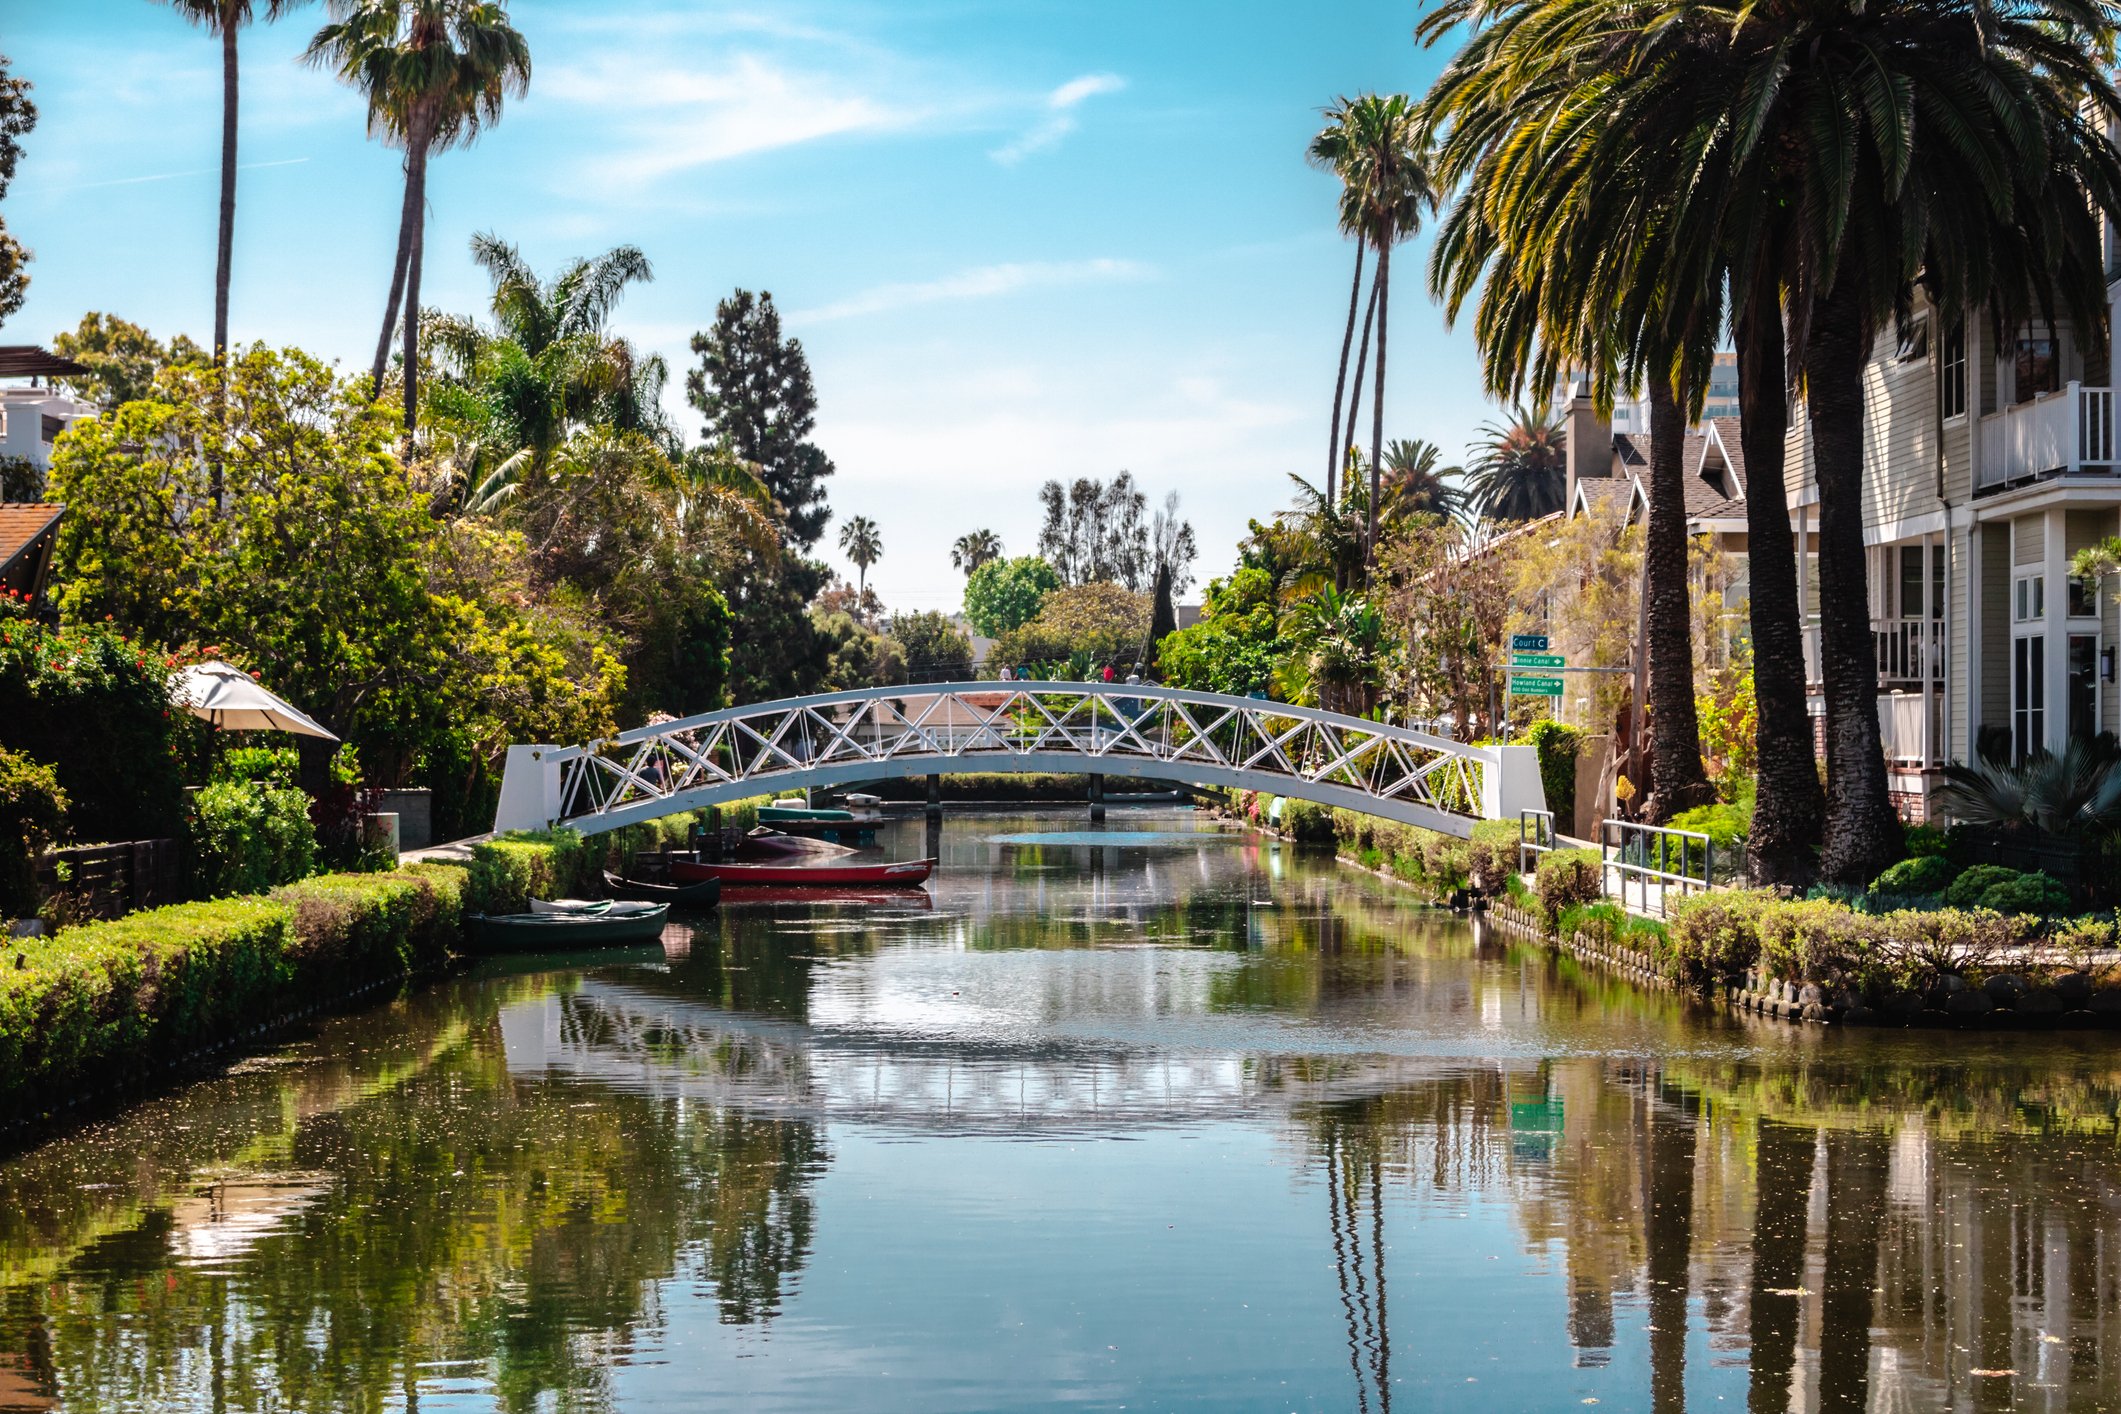 Venice Canals on a beautiful sunny day in Venice California